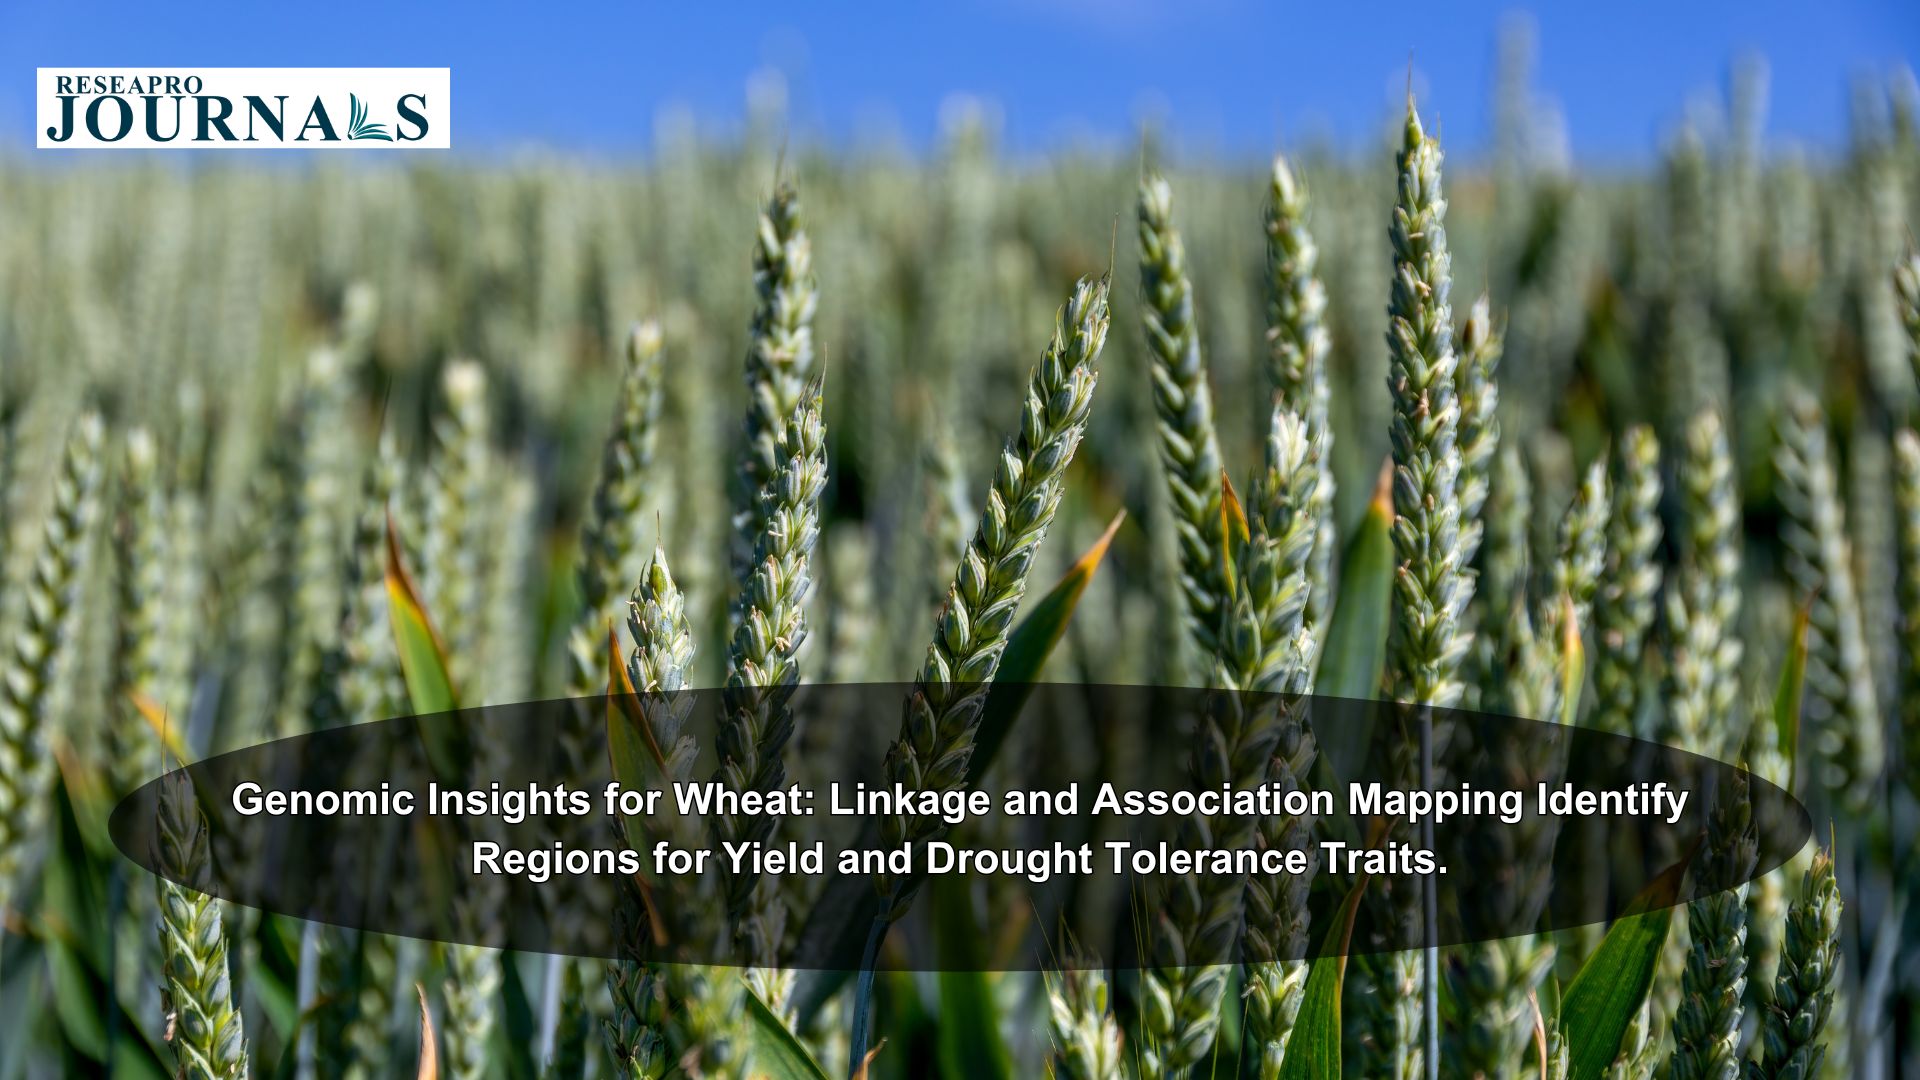 Genomic Insights for Wheat: Linkage and Association Mapping Identify Regions for Yield and Drought Tolerance Traits